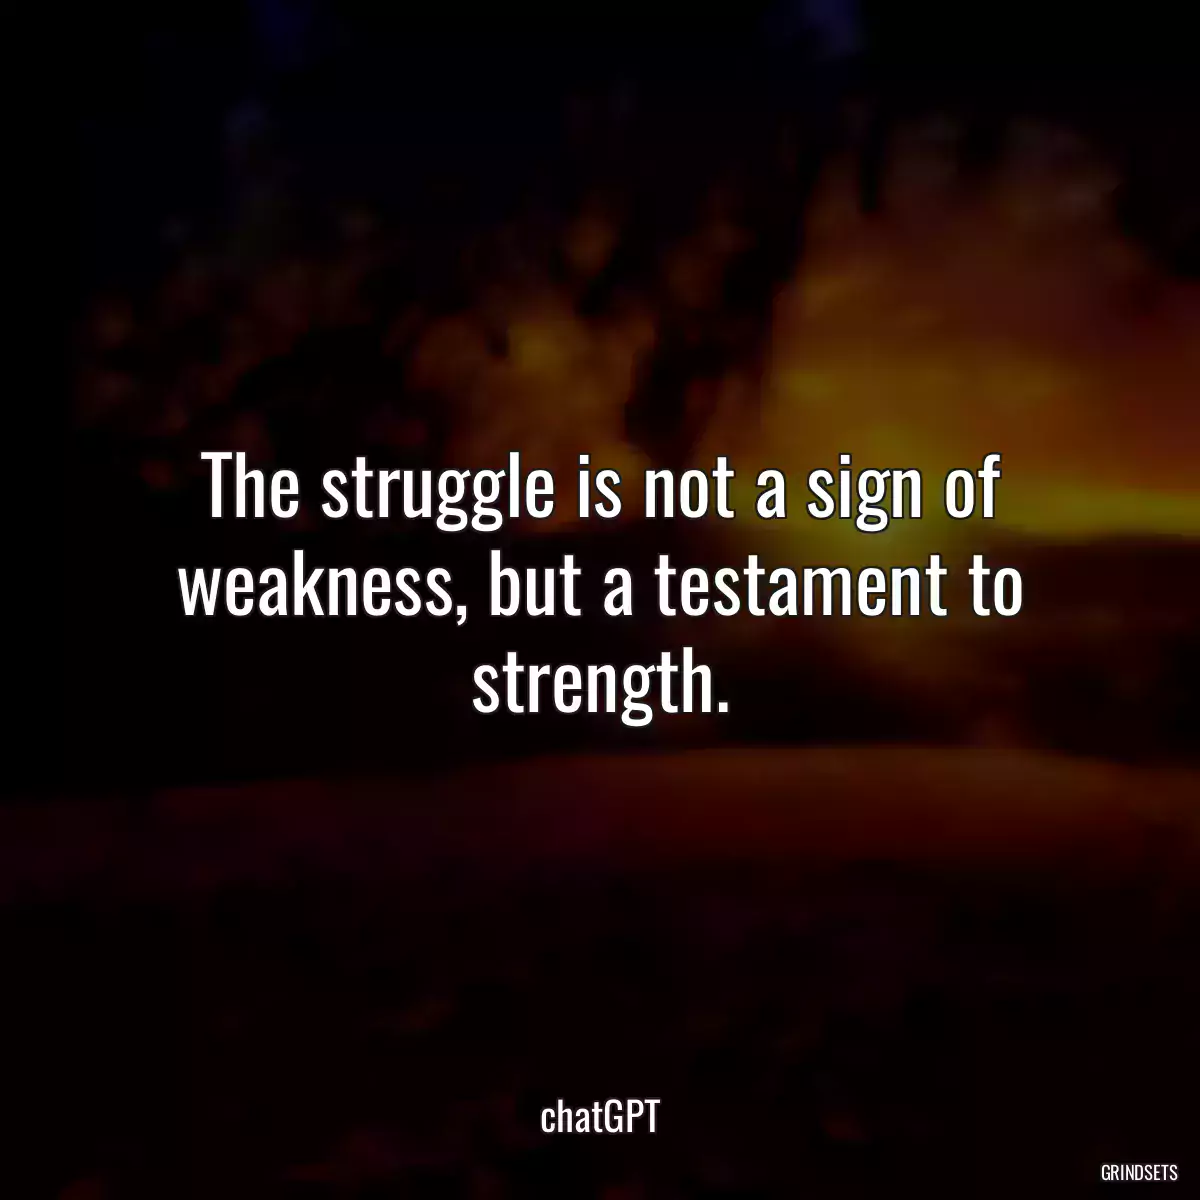 The struggle is not a sign of weakness, but a testament to strength.